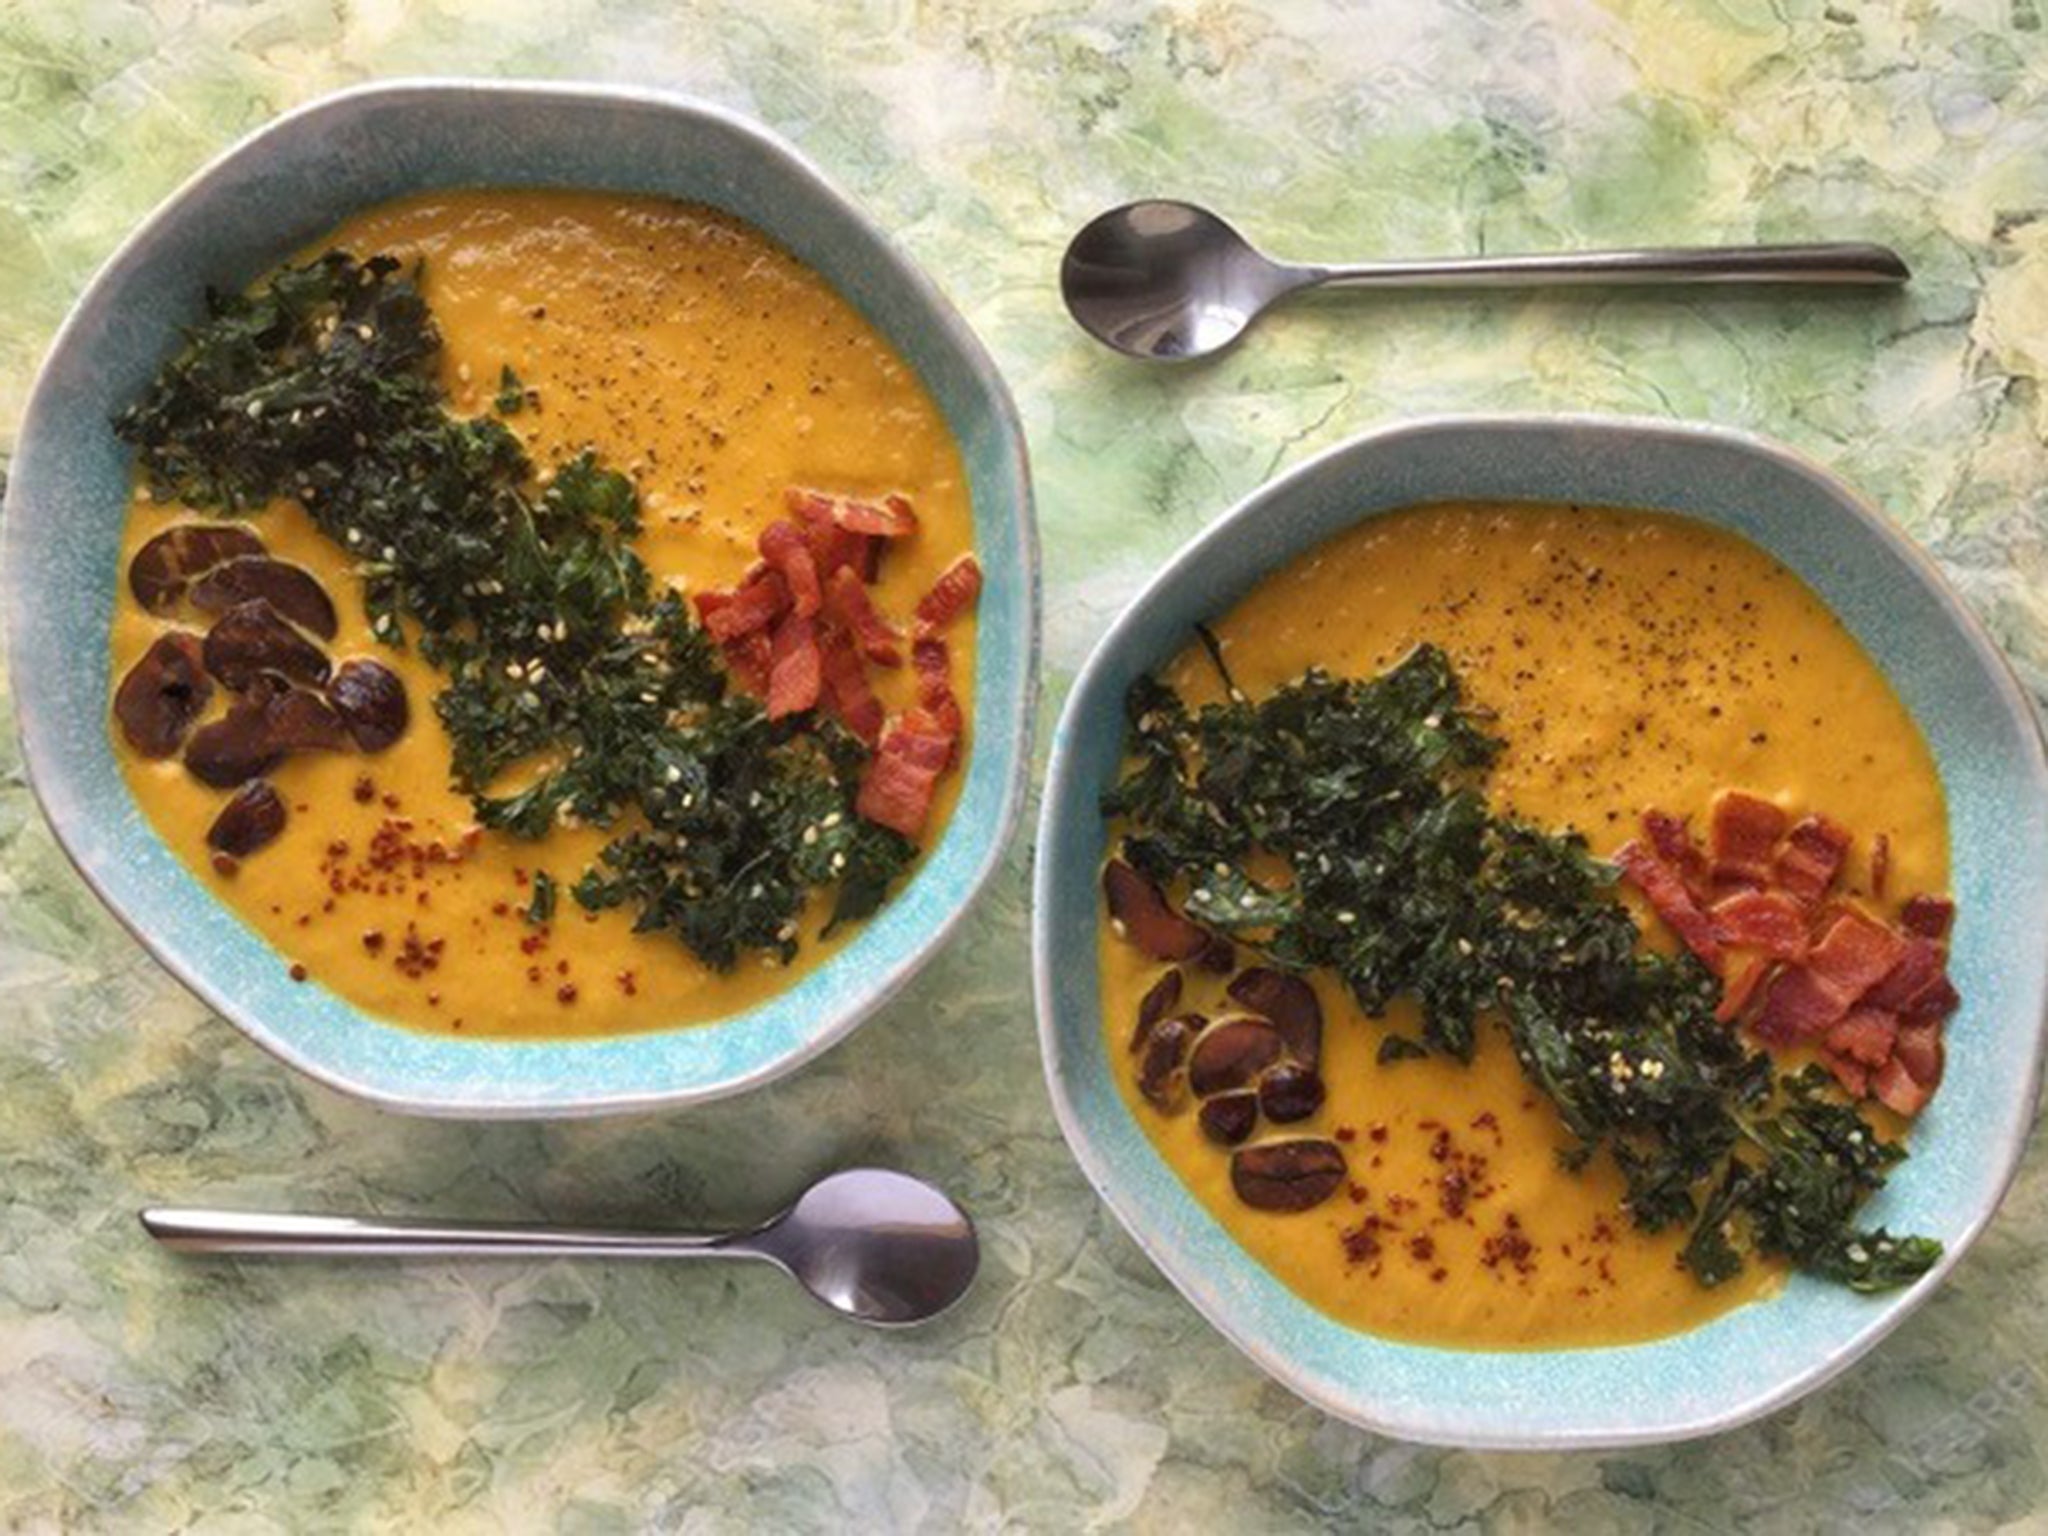 Creamy root vegetable soups are the perfect go-to for autumn evenings